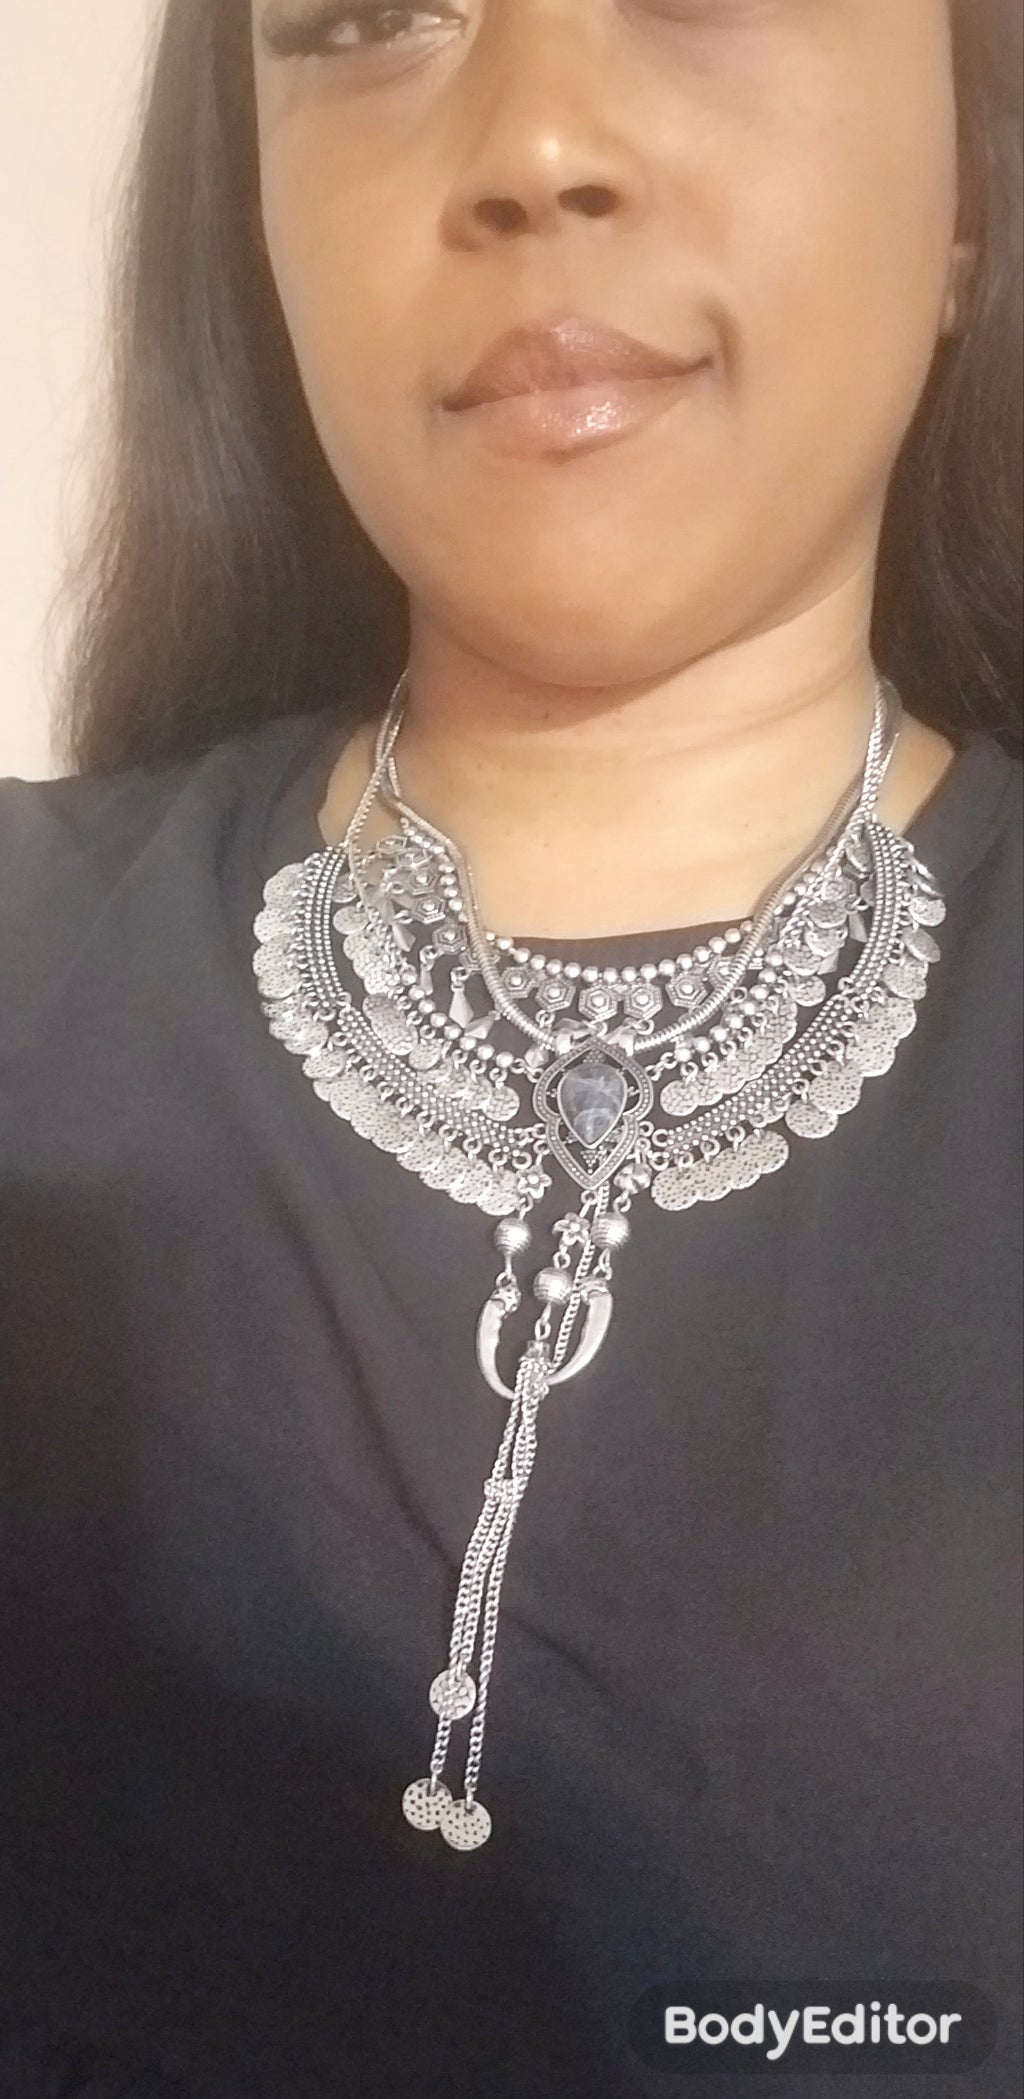 Doing the Most Bib Necklace - Luxe 81